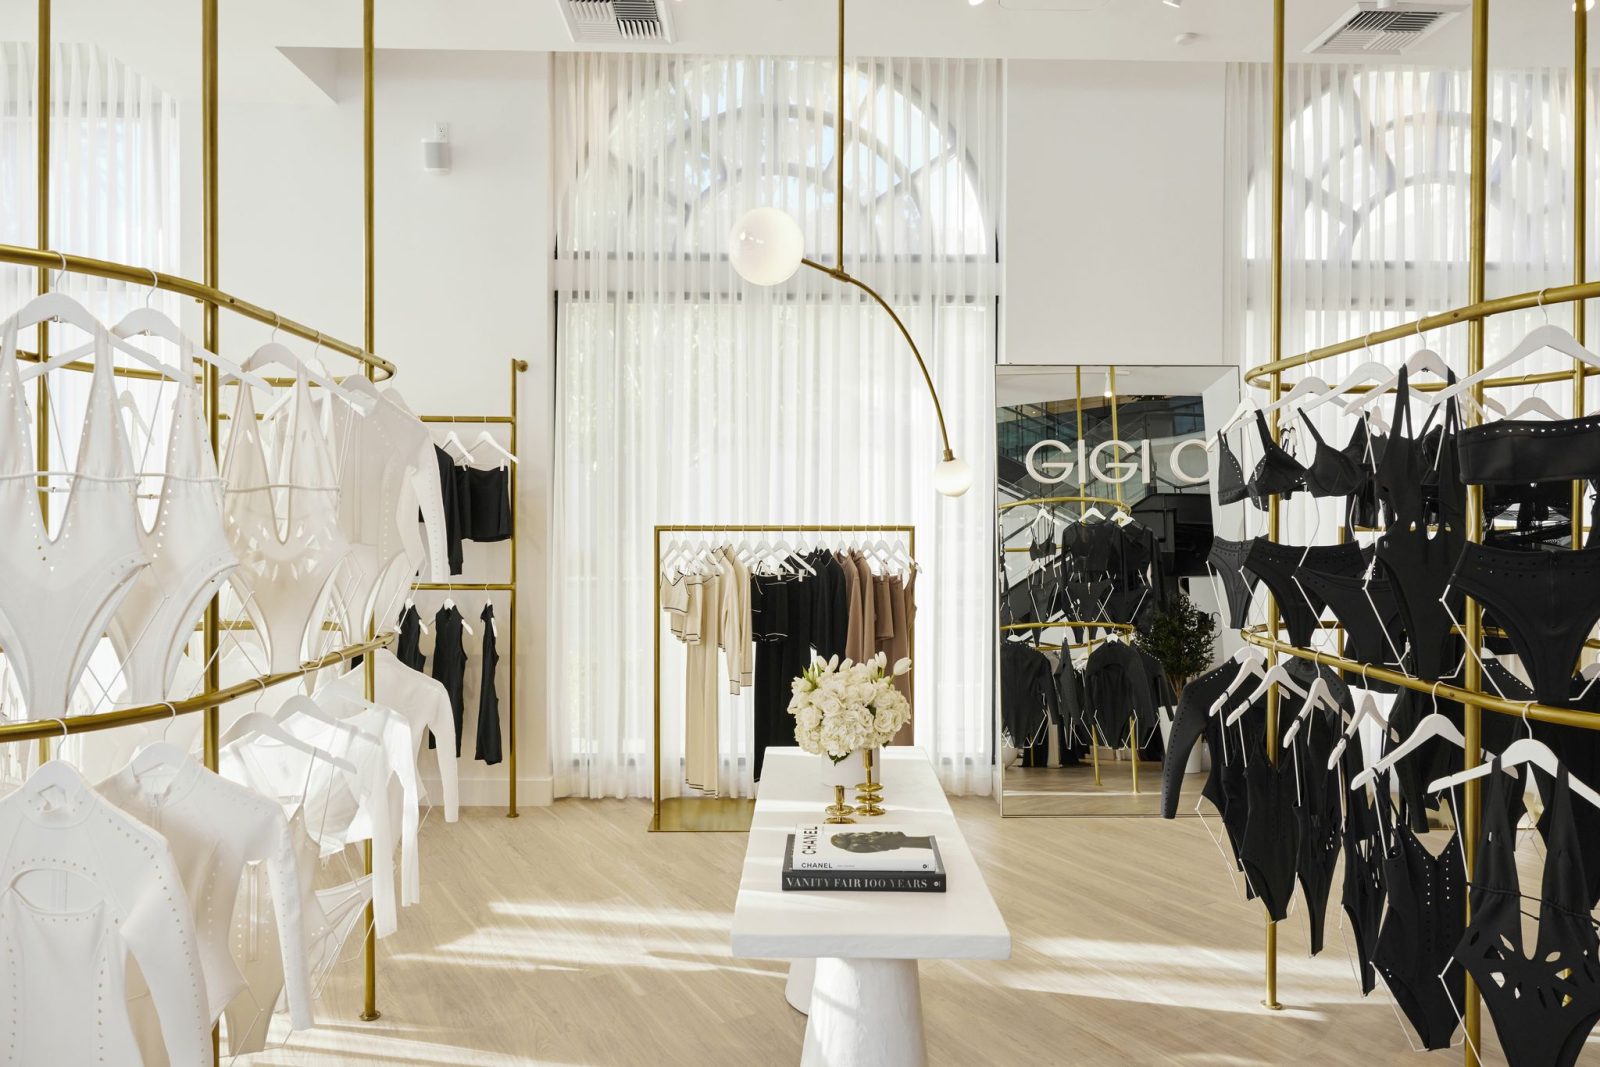 Why Gigi C is opening an appointment-only showroom